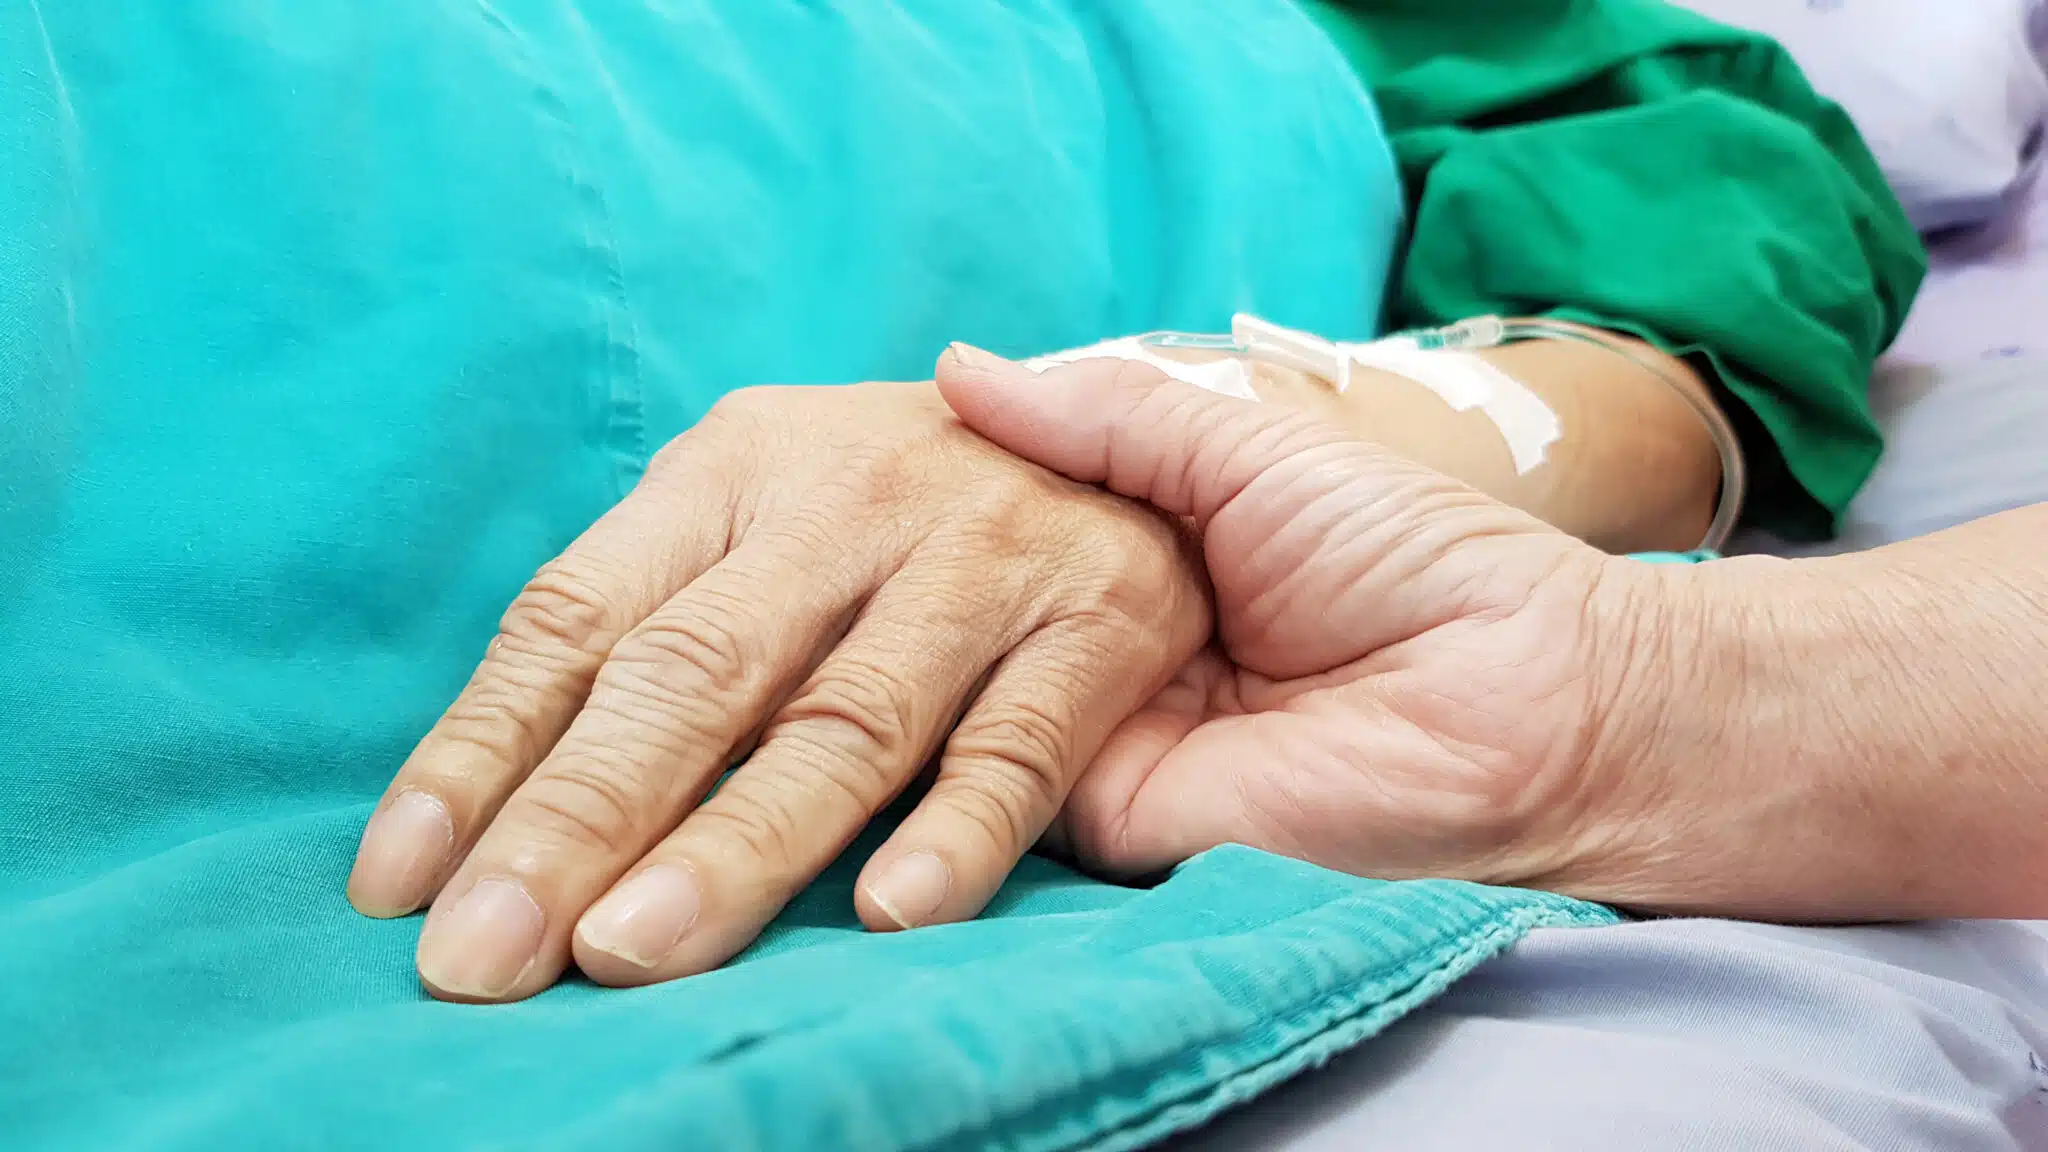 person holding patient's hand in hospital